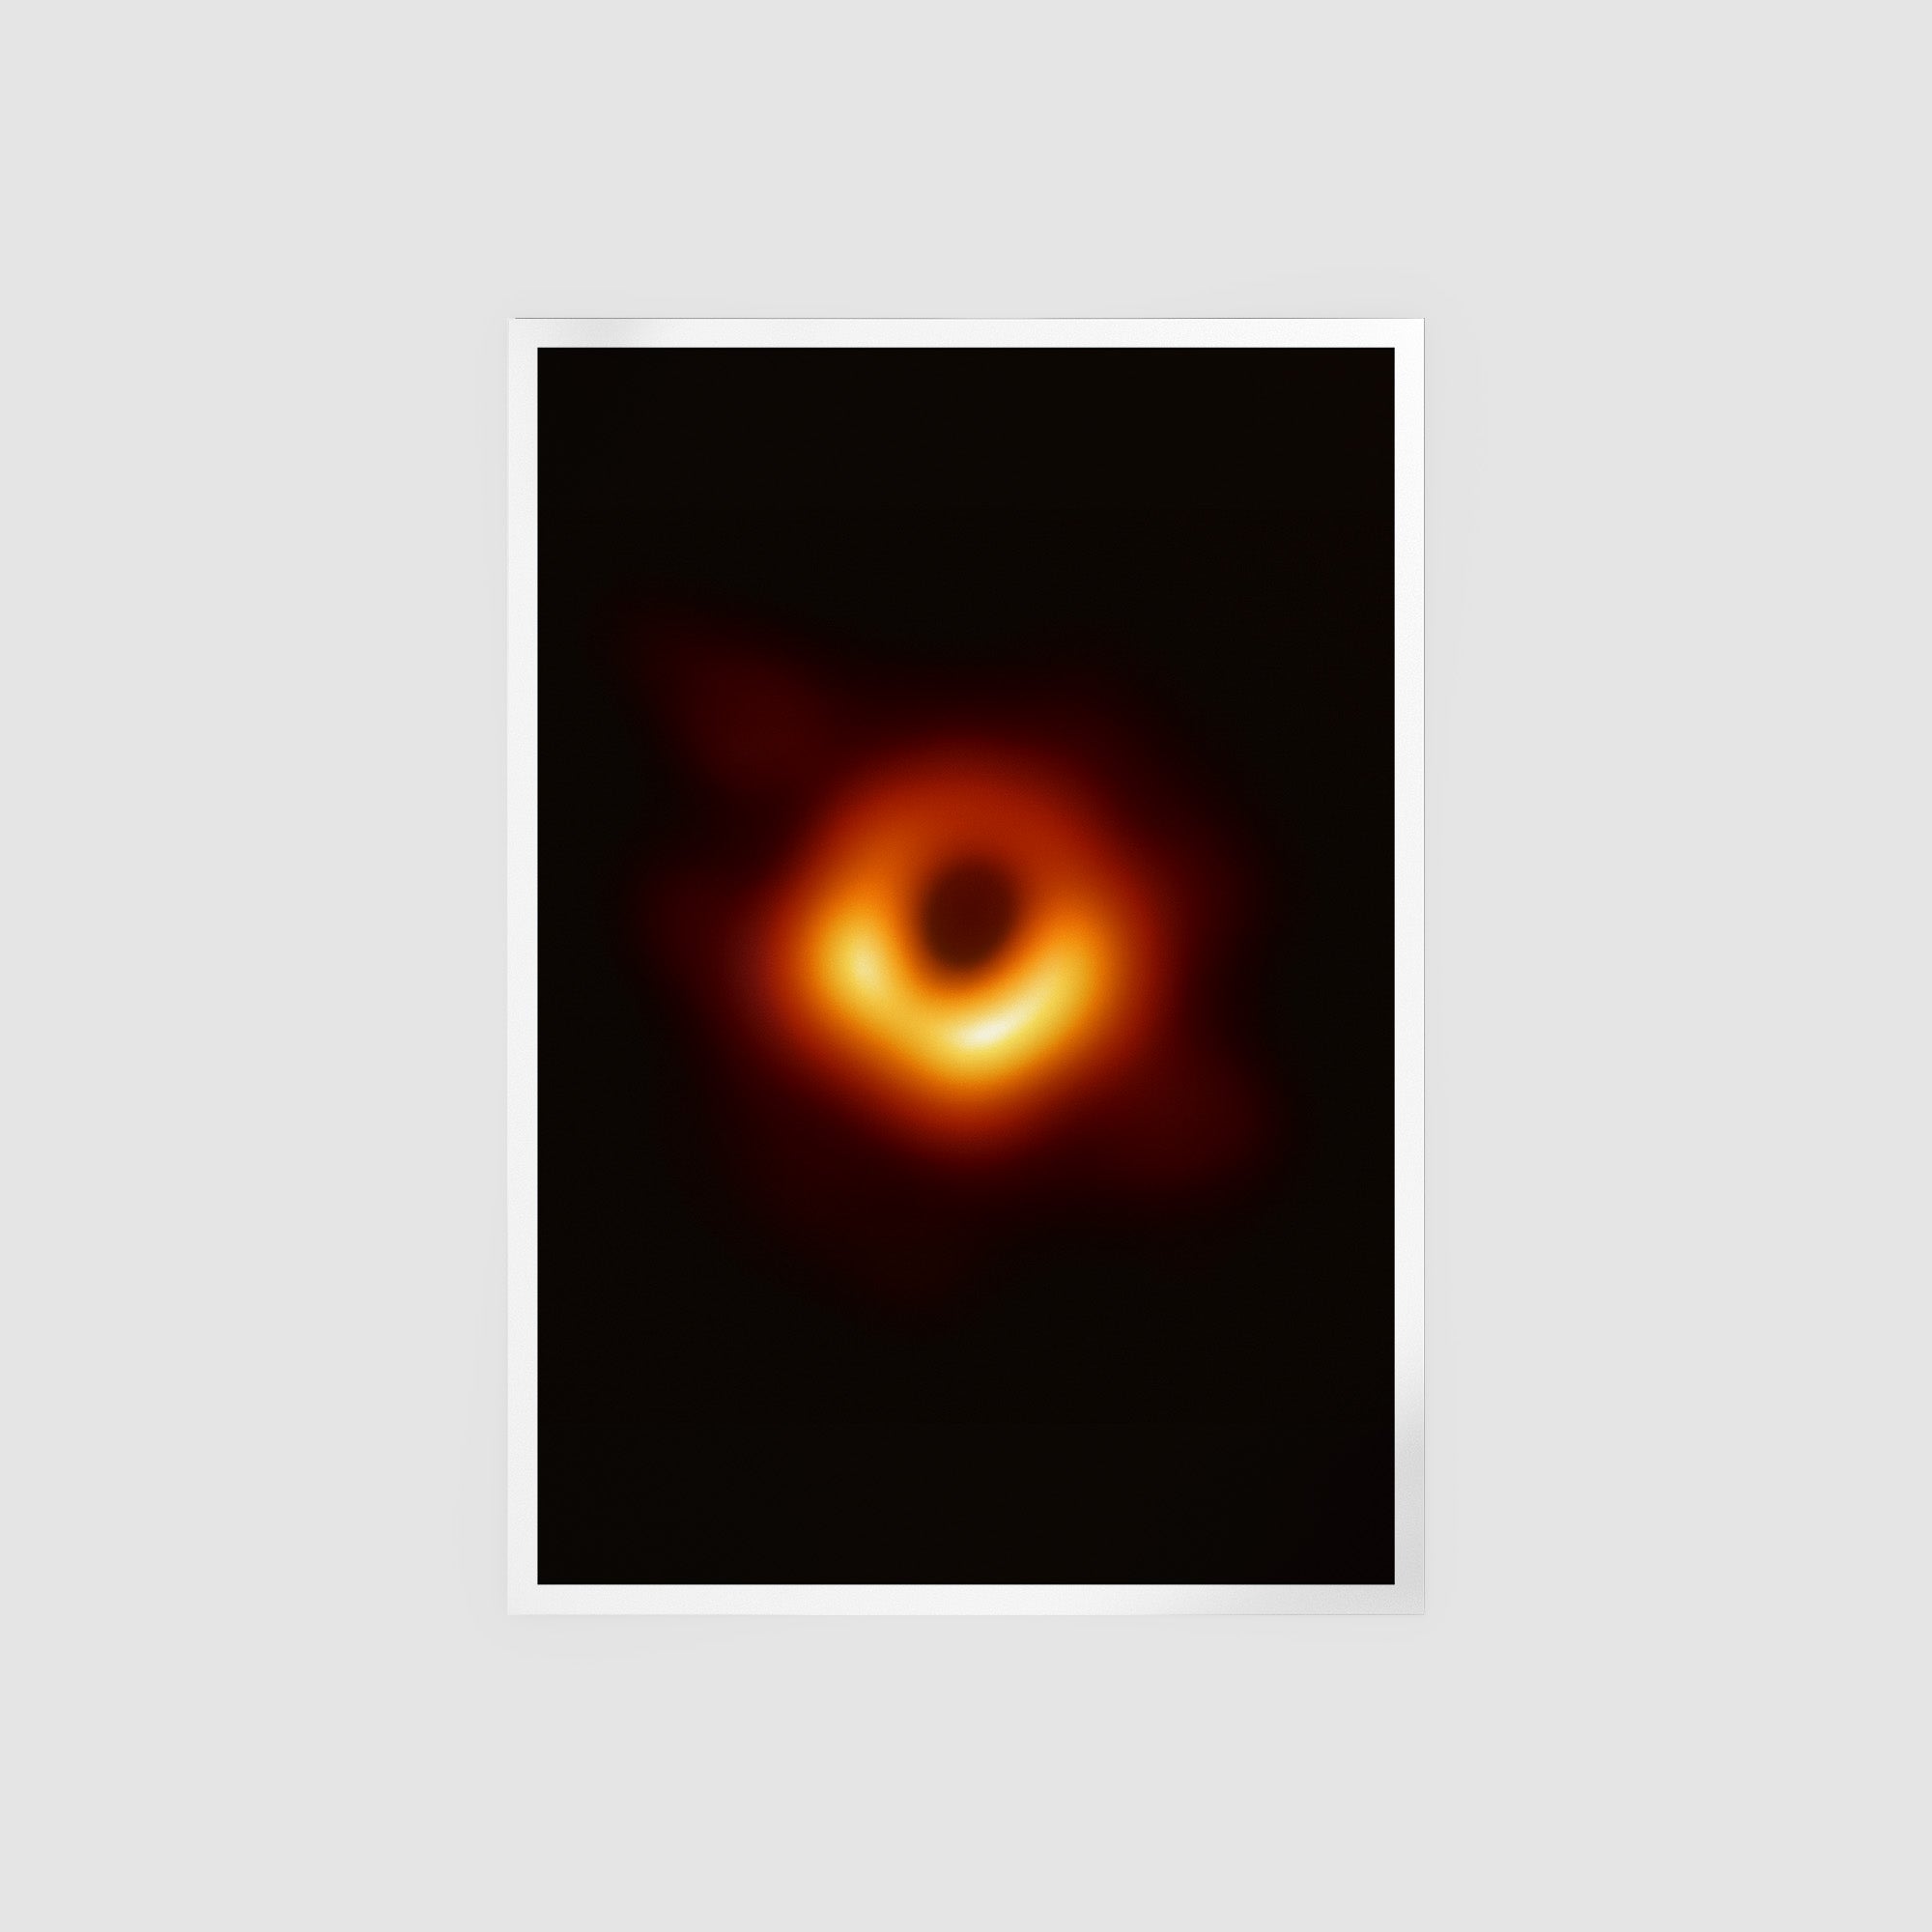 First Image Of A Black Hole